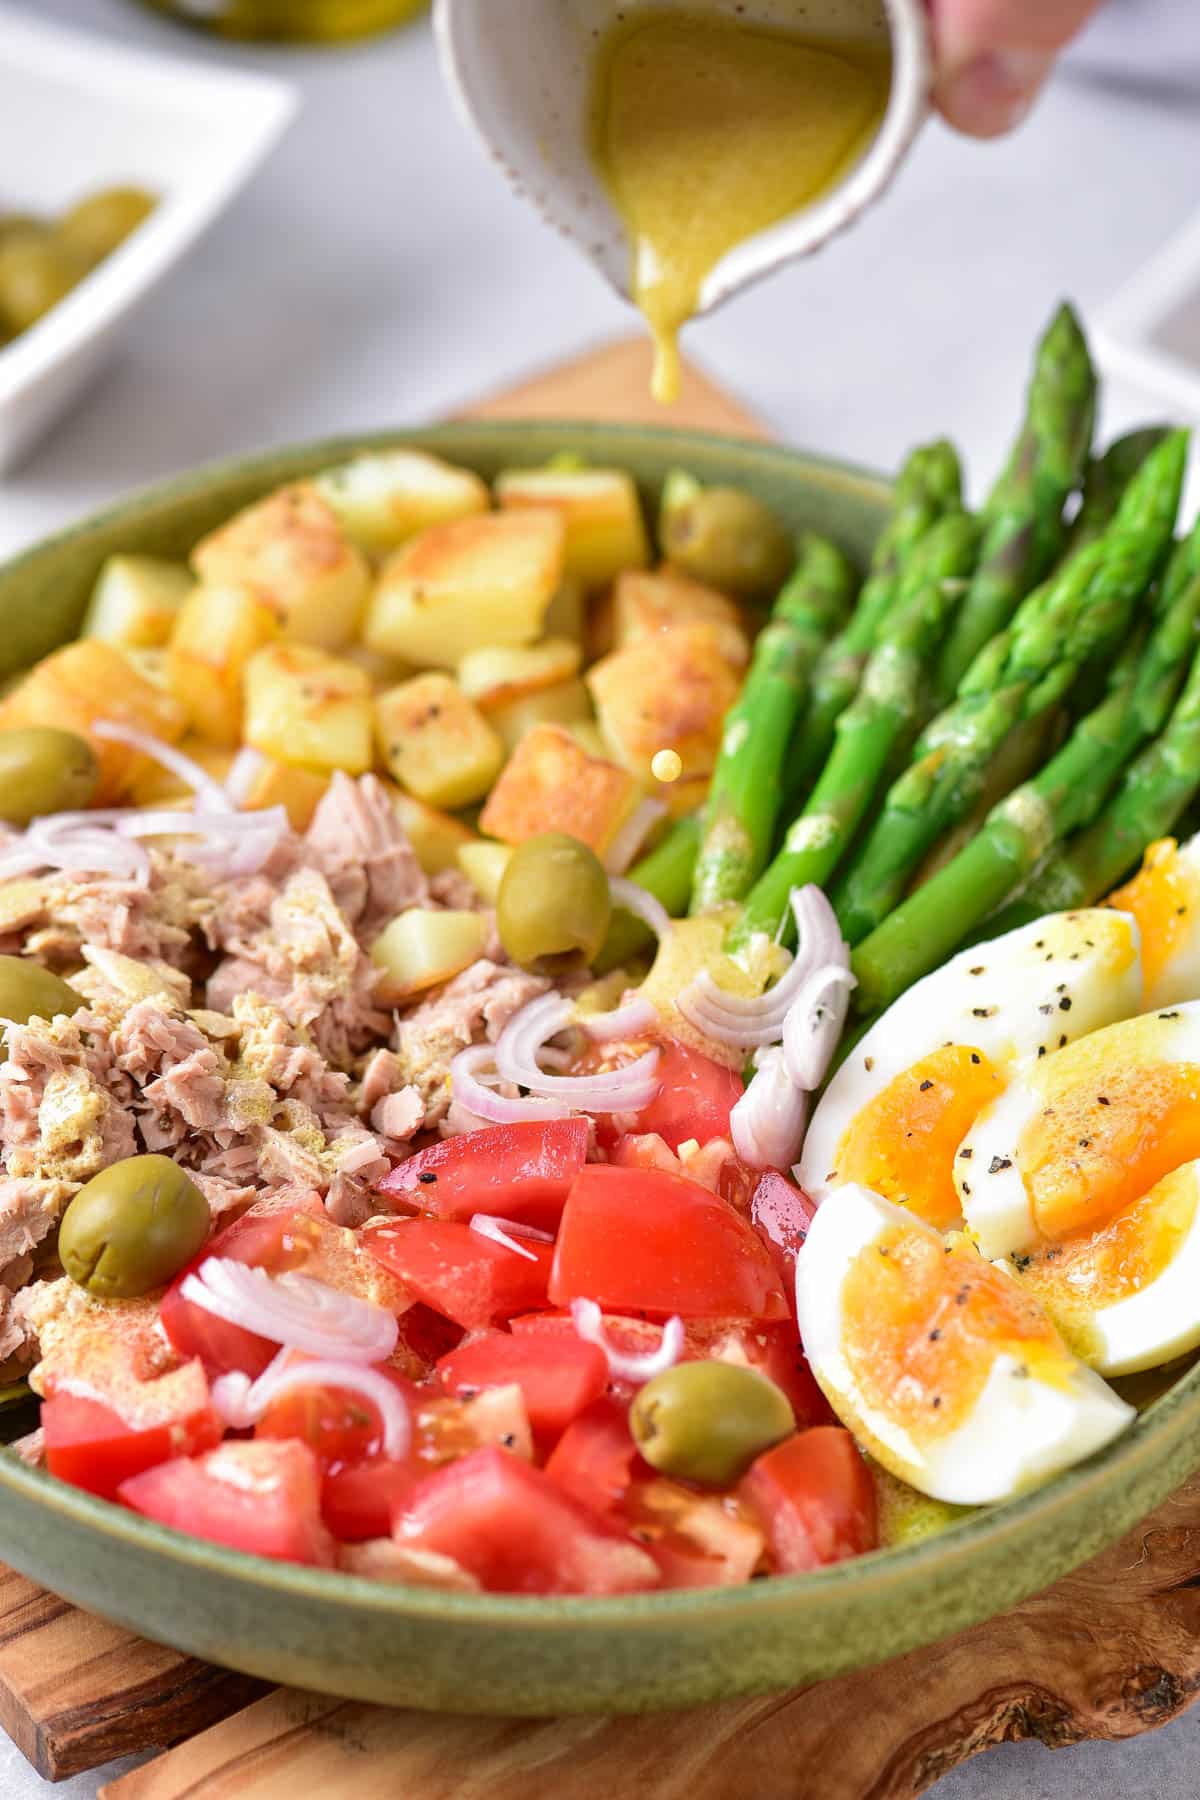 Salad with vegetables, egg, tuna, potatoes, tomatoes, and asparagus in a green bowl on a wood trivet.